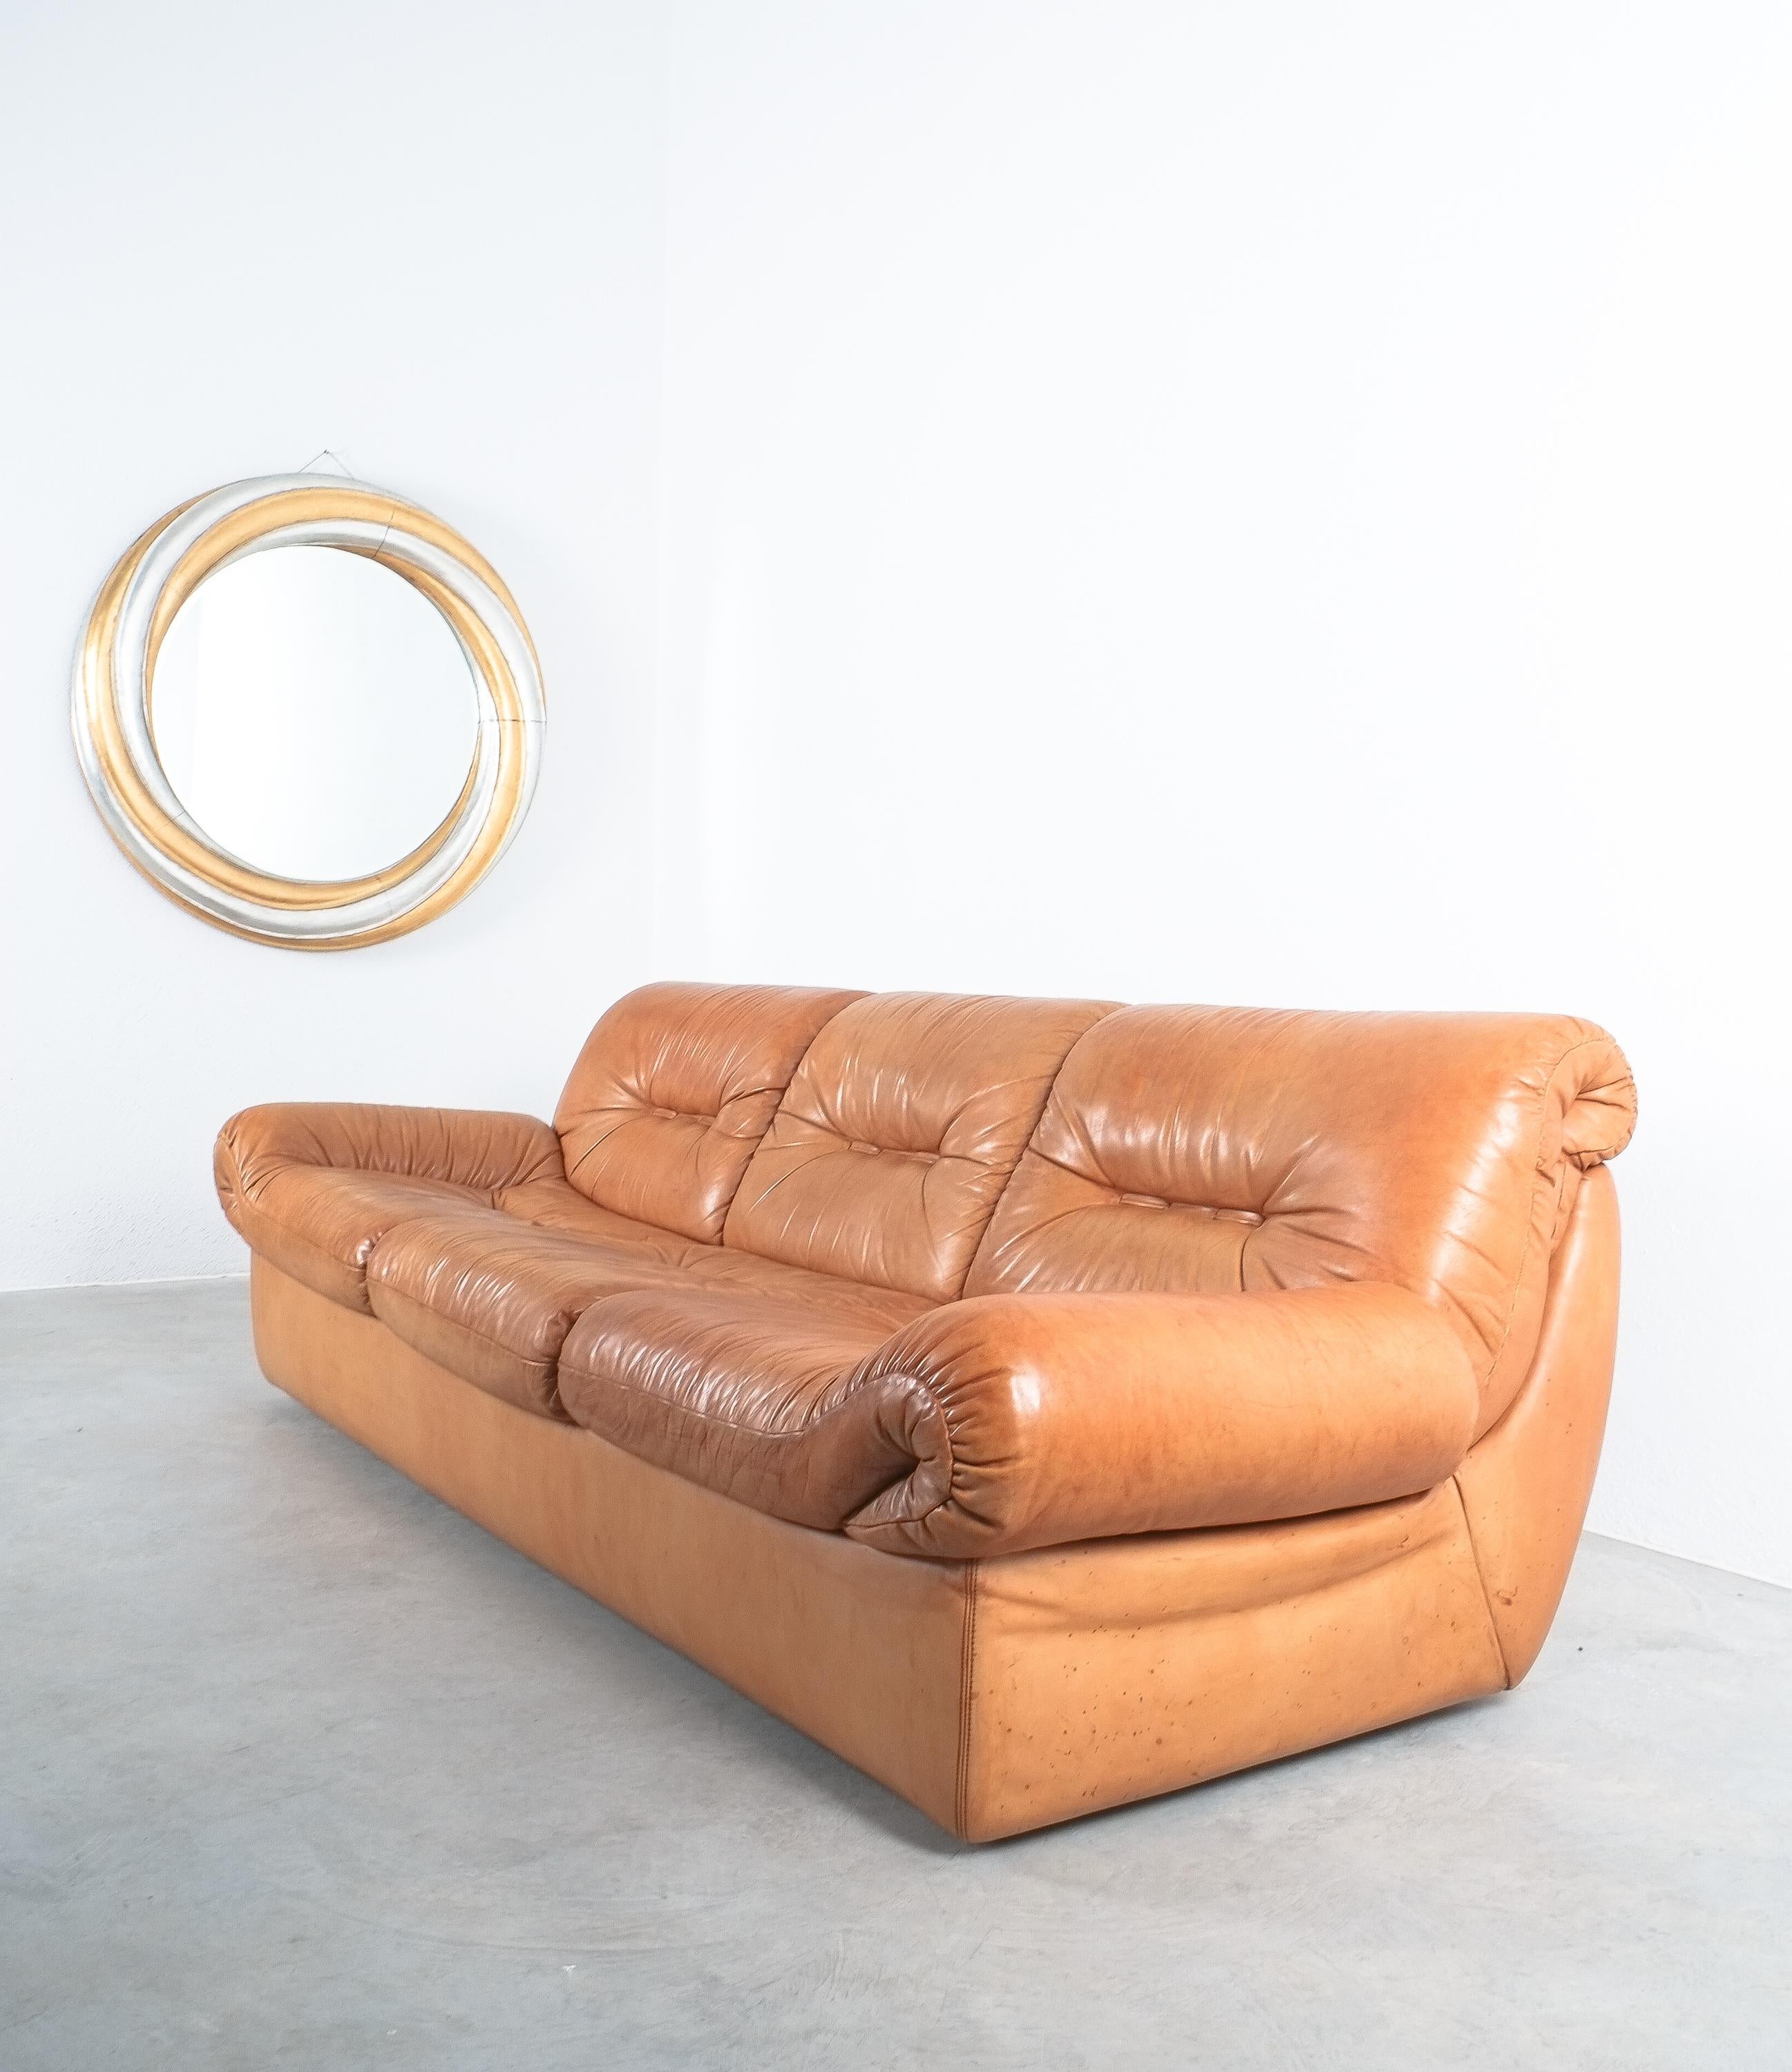 Karl Wittmann Chairman Sofa Cognac Brown Leather by Bruno Egger, Austria 1971 In Good Condition For Sale In Vienna, AT